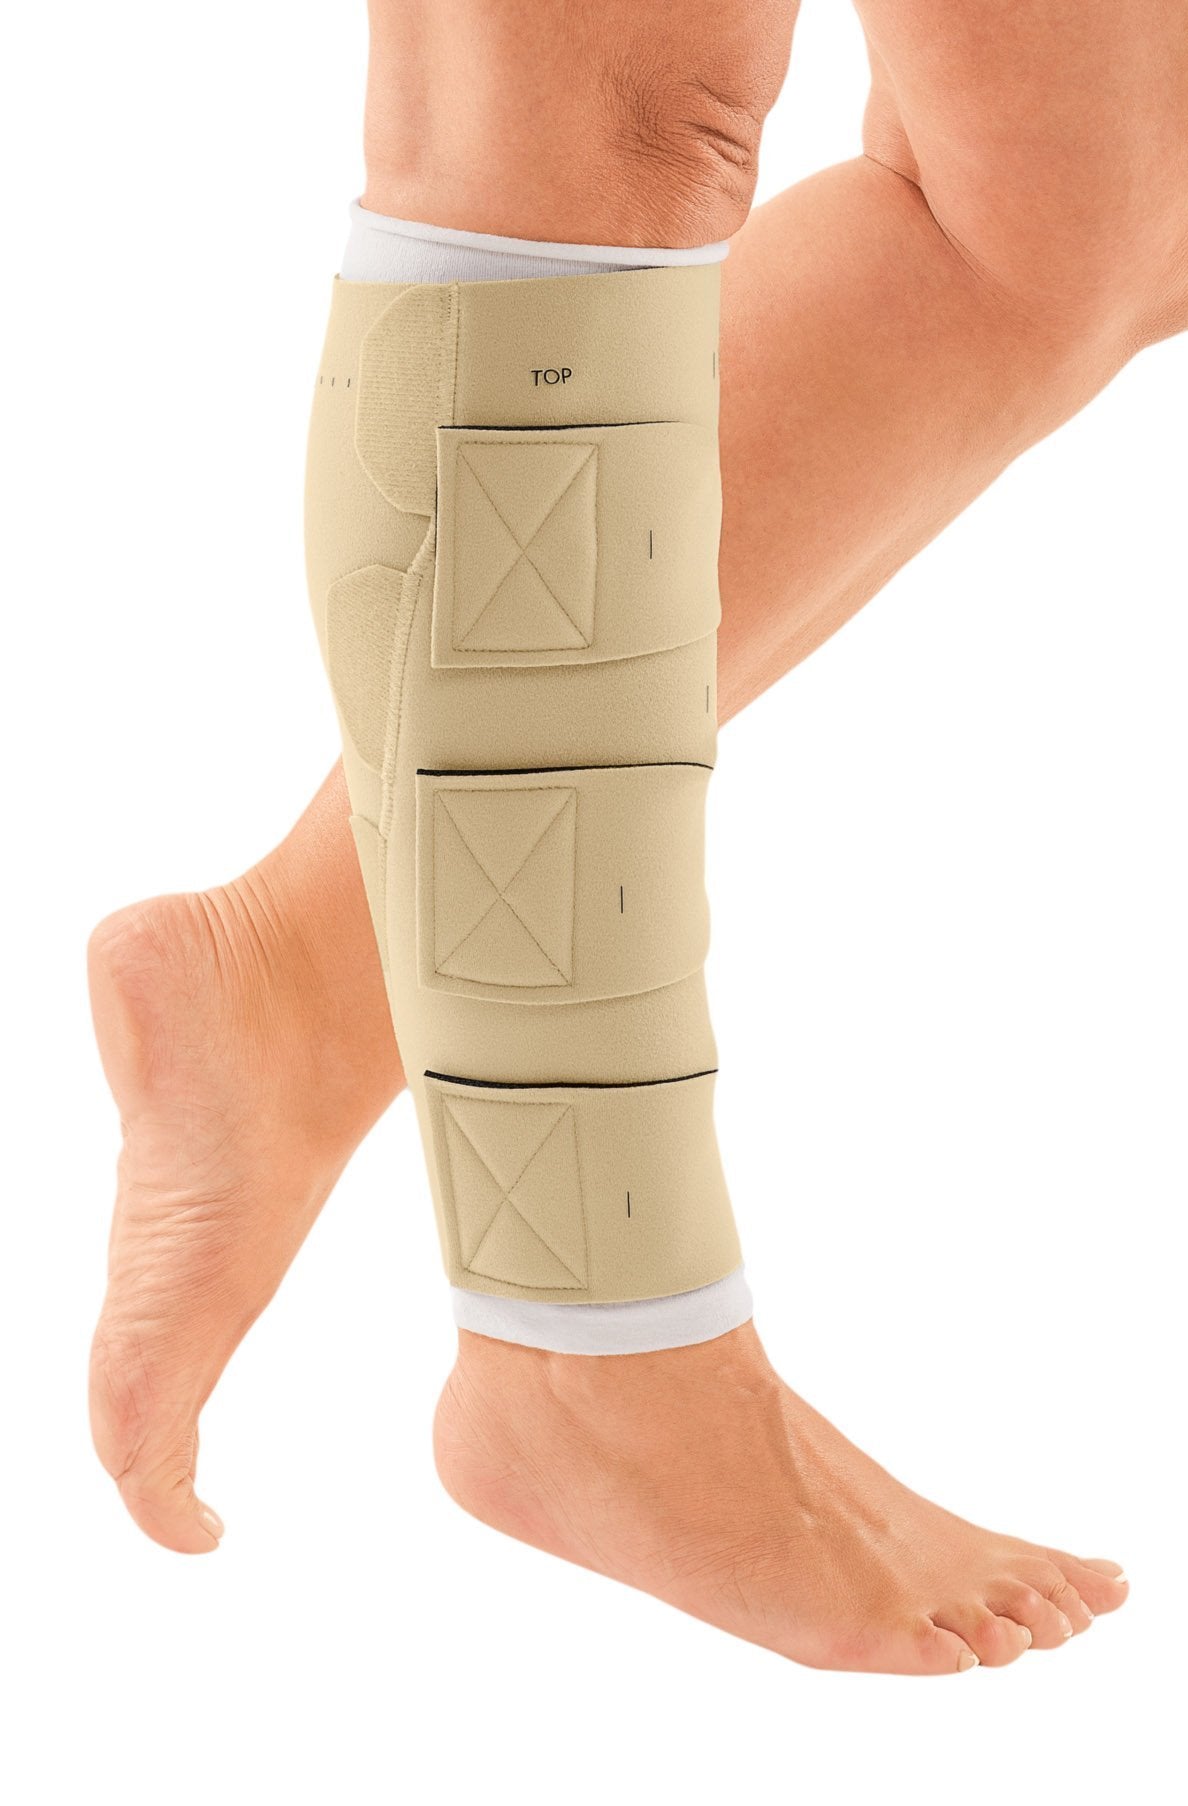 circaid Reduction Kit Lower Leg - All About Compression